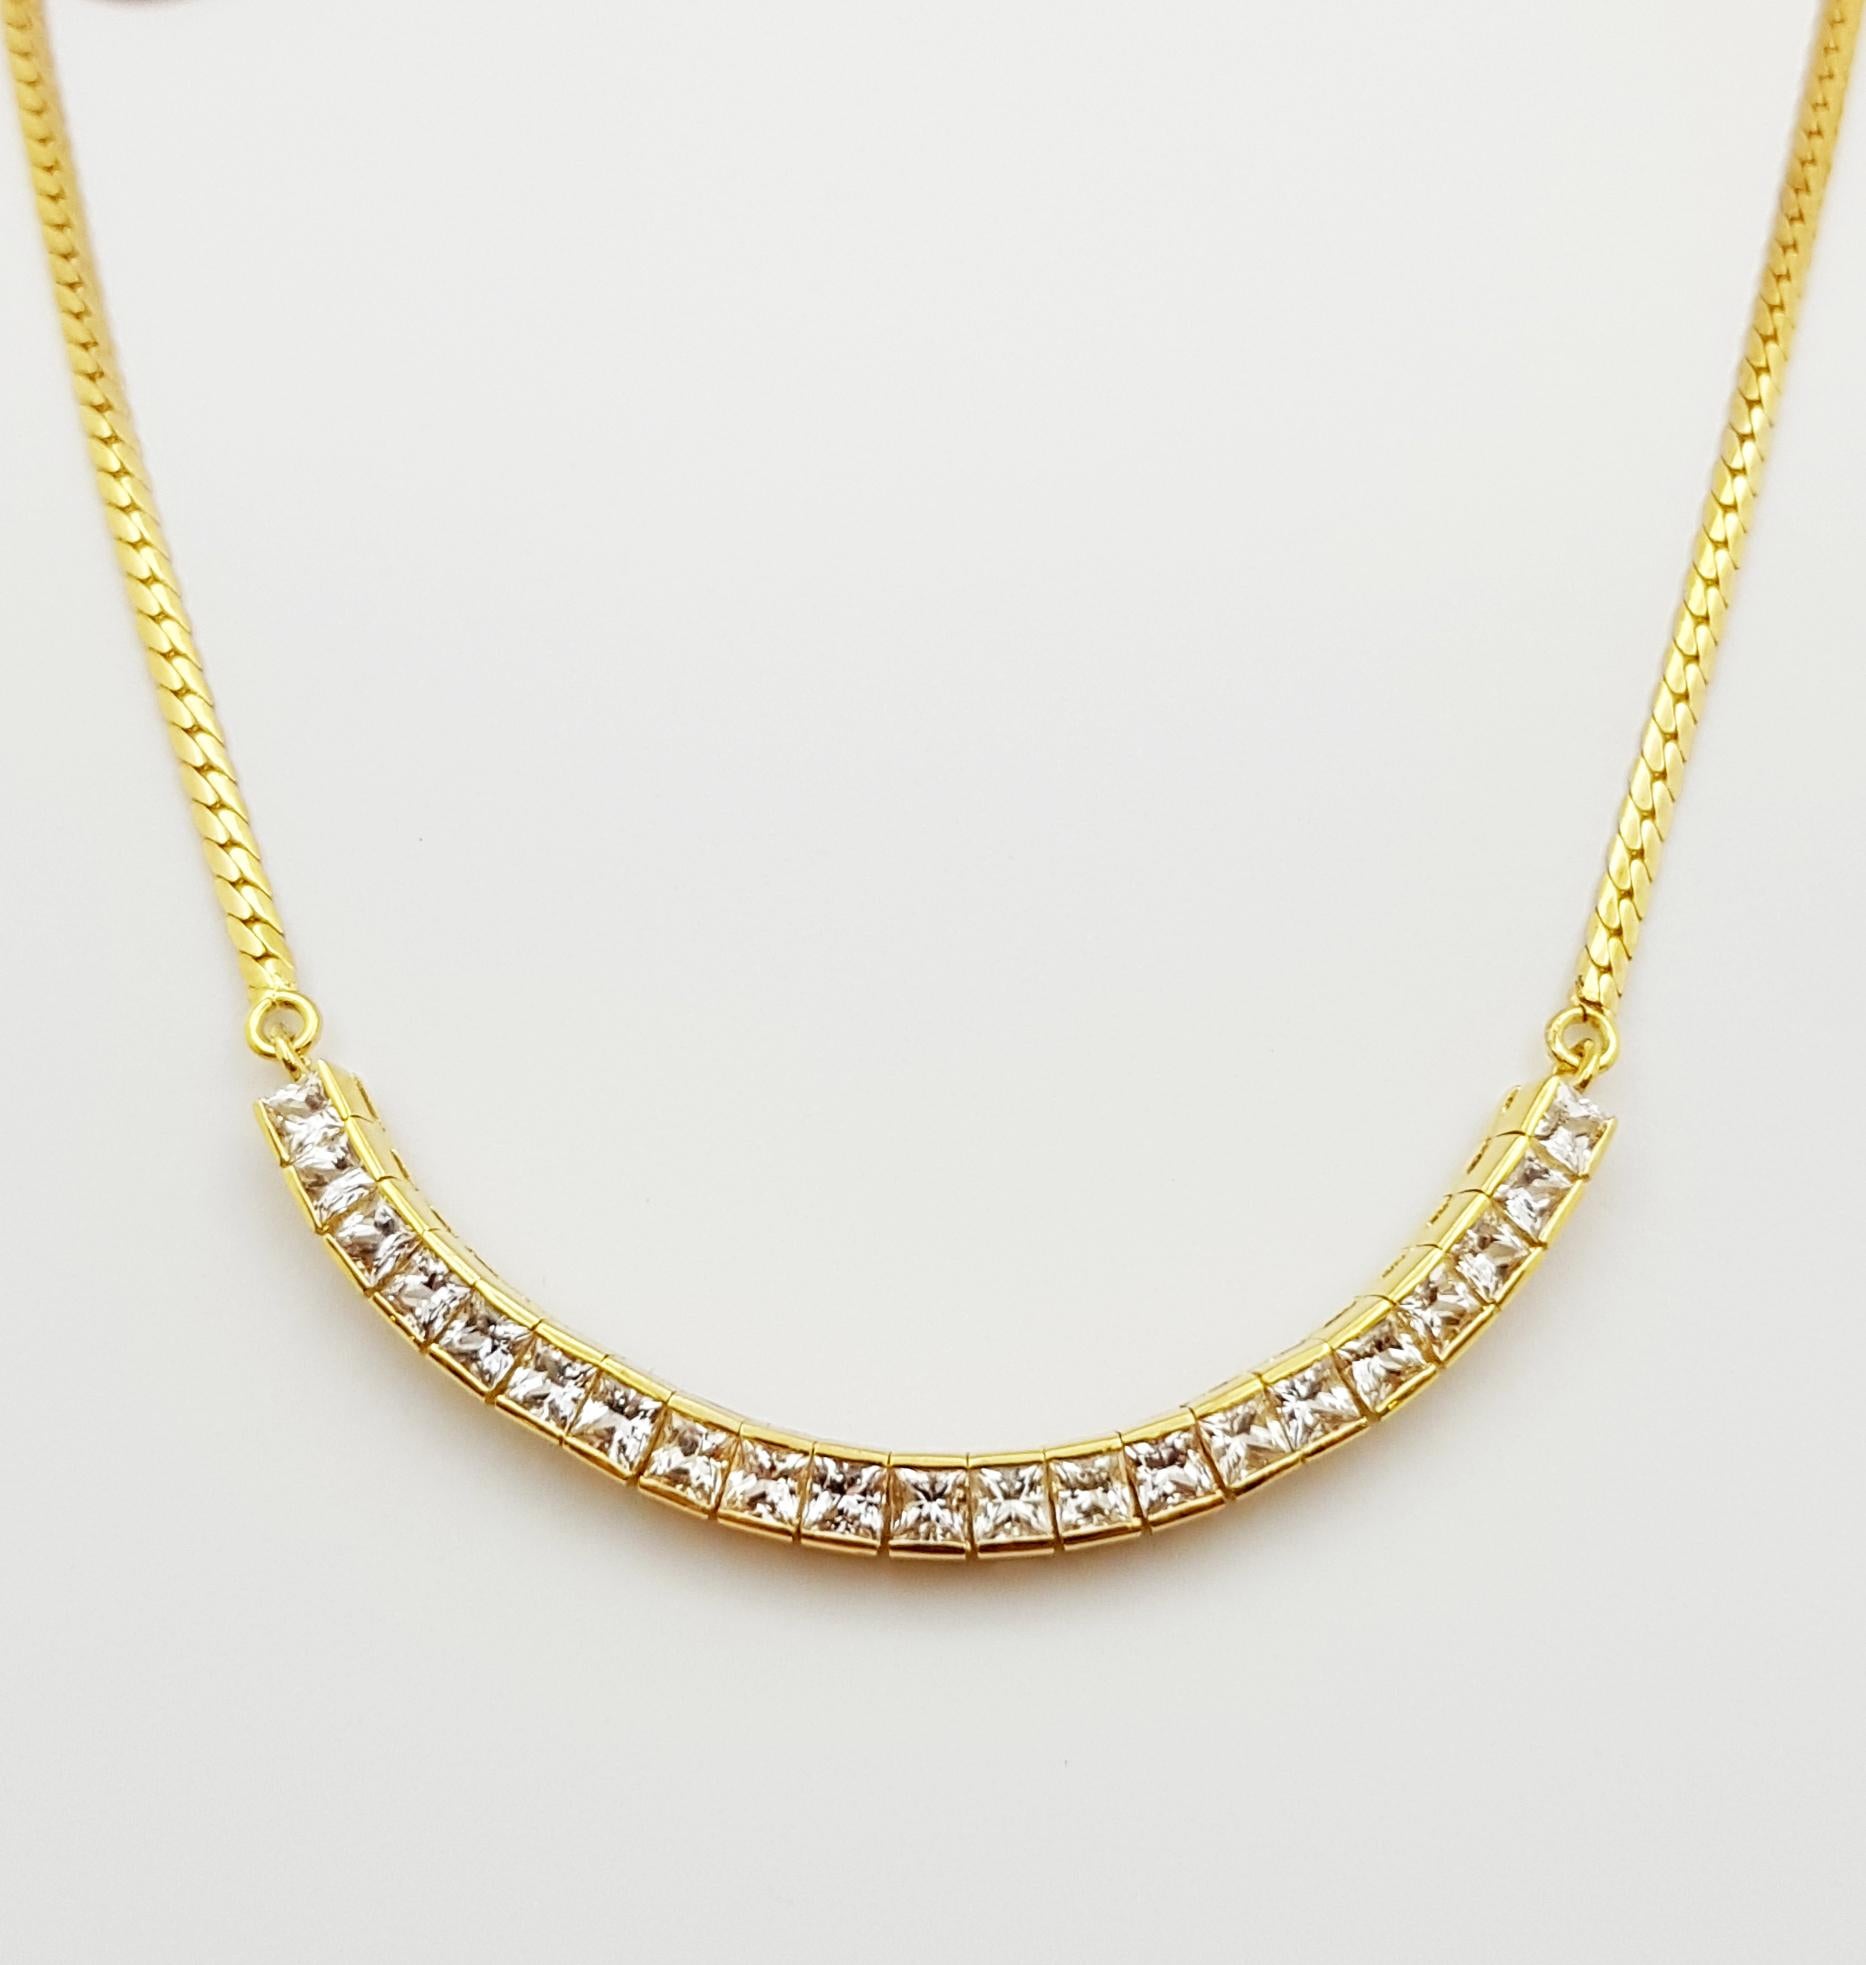 White Sapphire 3.65 carats Necklace set in 18 Karat Gold Settings

Width: 0.4 cm 
Length: 47.5 cm
Total Weight: 14.73 grams

